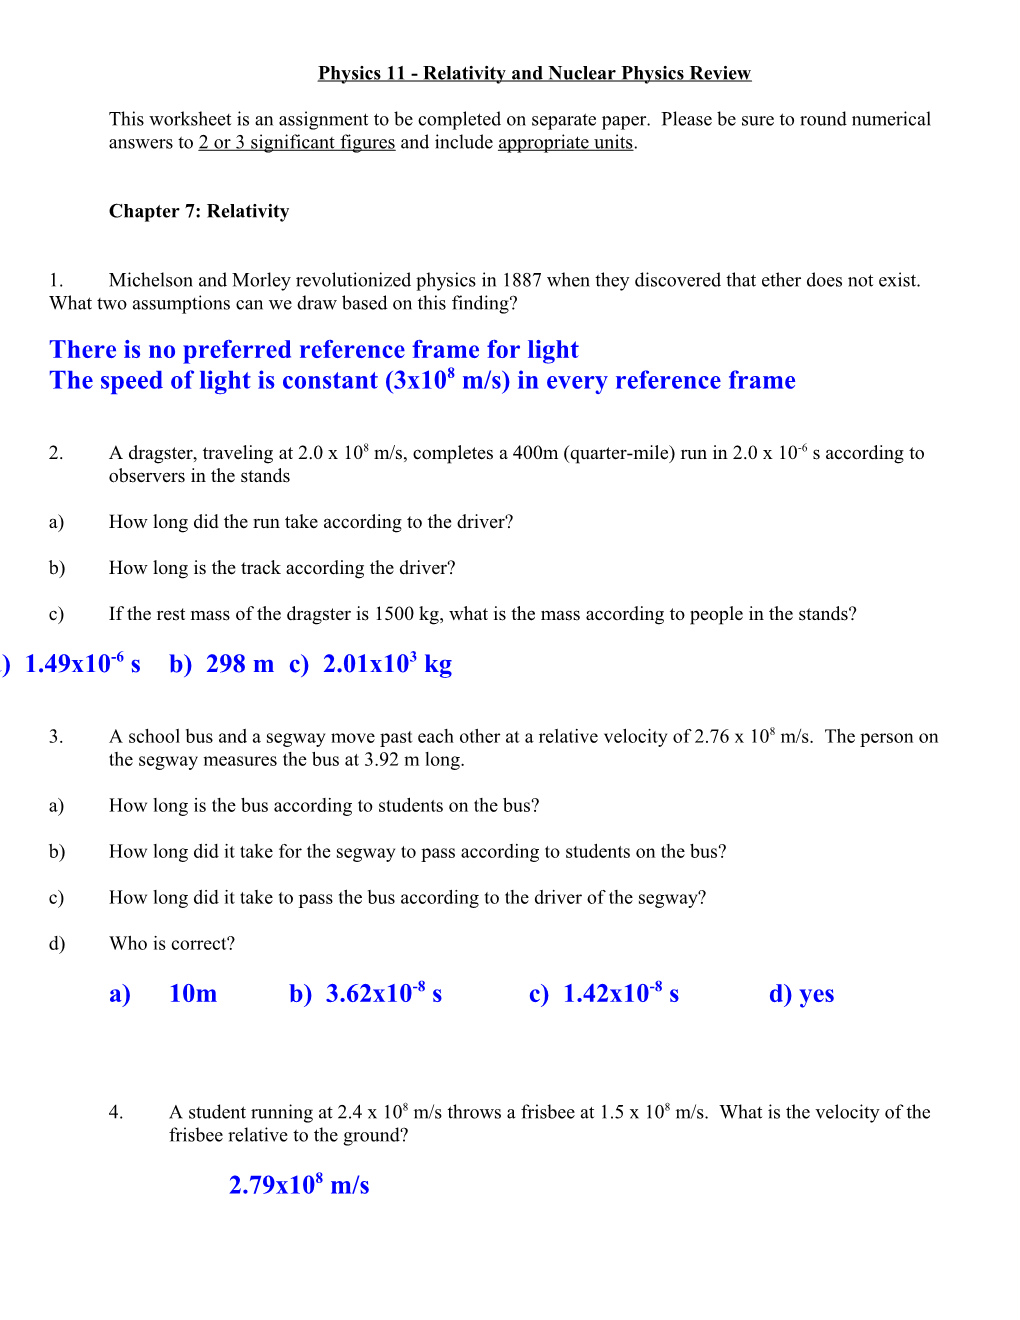 Physics 11 - Relativity Review